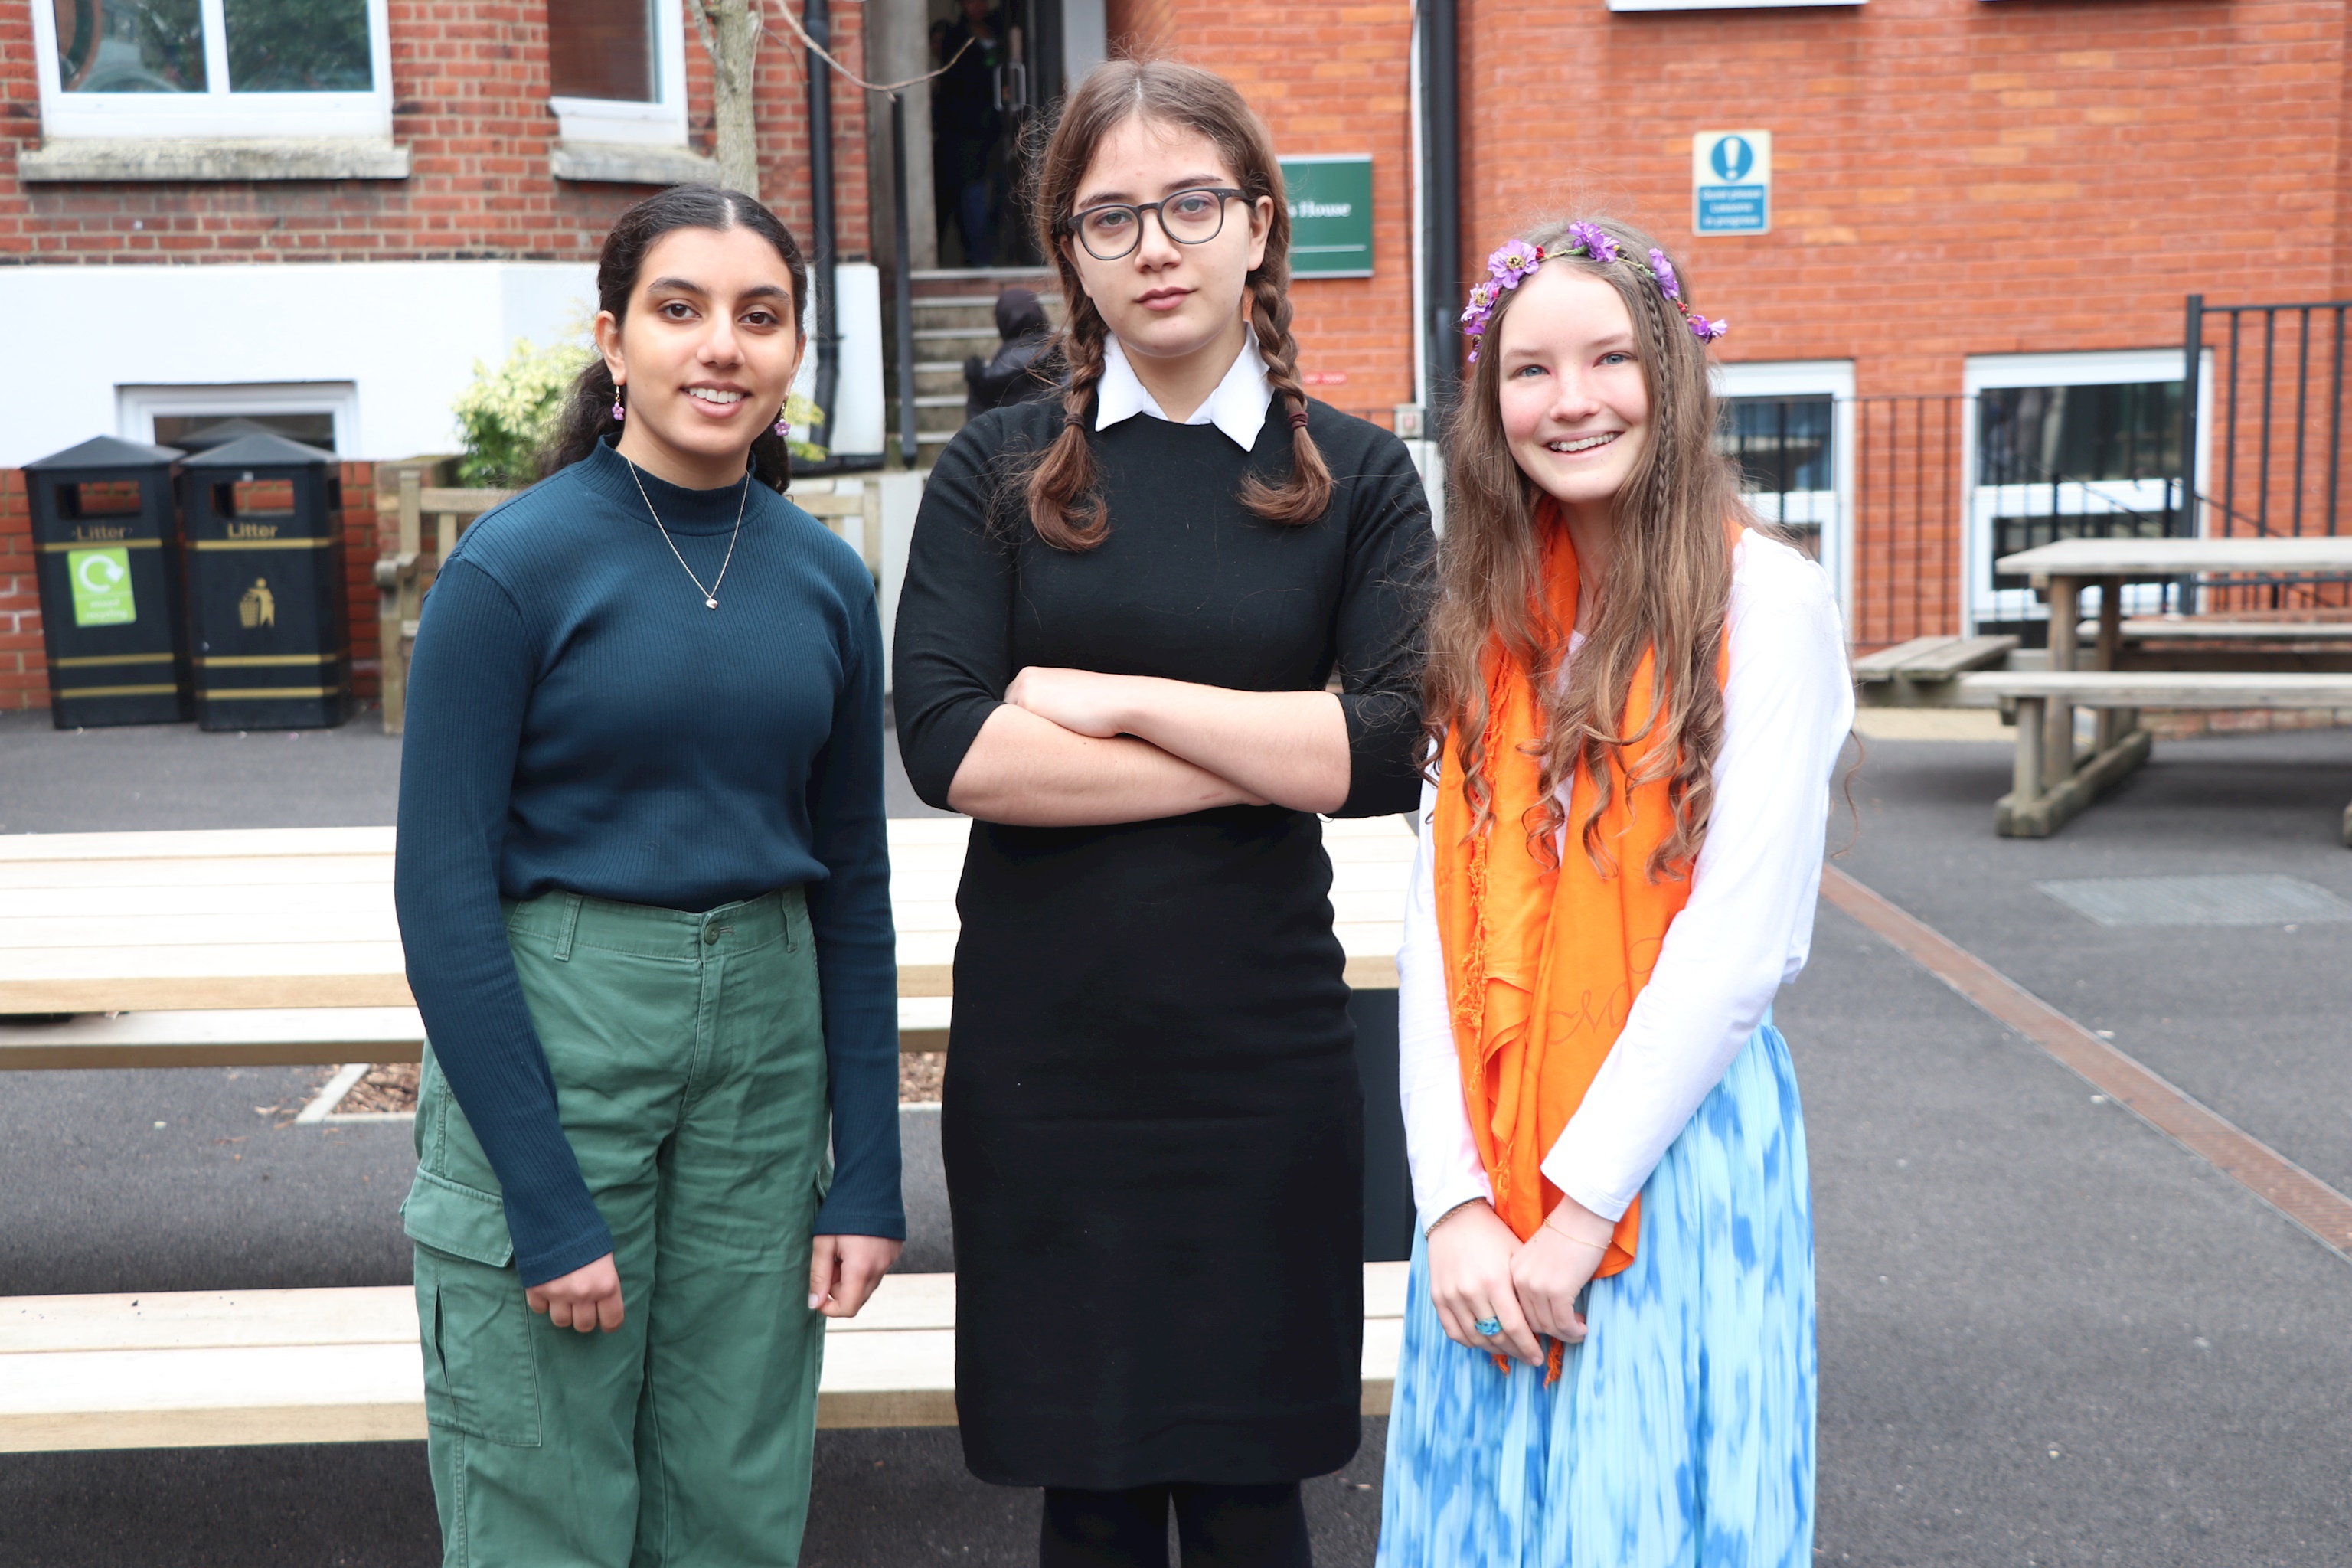 Three senior school girls dressed for World Book Day. The teenage girl on the left is dressed in green trousers a blue long-sleeved top; the girl in the middle is dressed in a black dress with braided hair; and the girl on the right is wearing a flowing blue skirt with an orange scarf and flowers in her hair